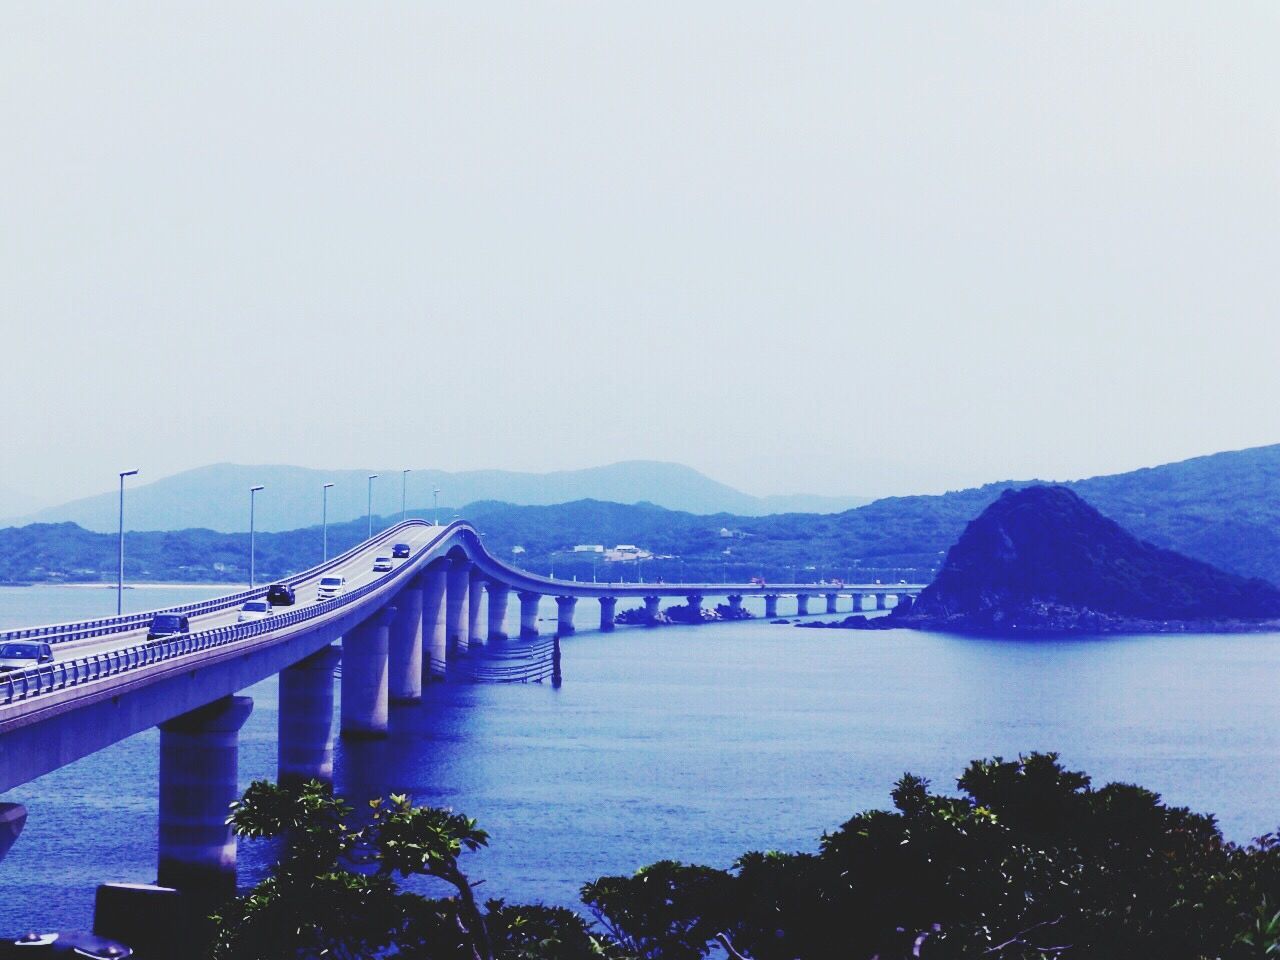 clear sky, water, mountain, bridge - man made structure, connection, copy space, built structure, tranquility, tranquil scene, bridge, scenics, architecture, river, beauty in nature, mountain range, nature, sea, railing, engineering, travel destinations